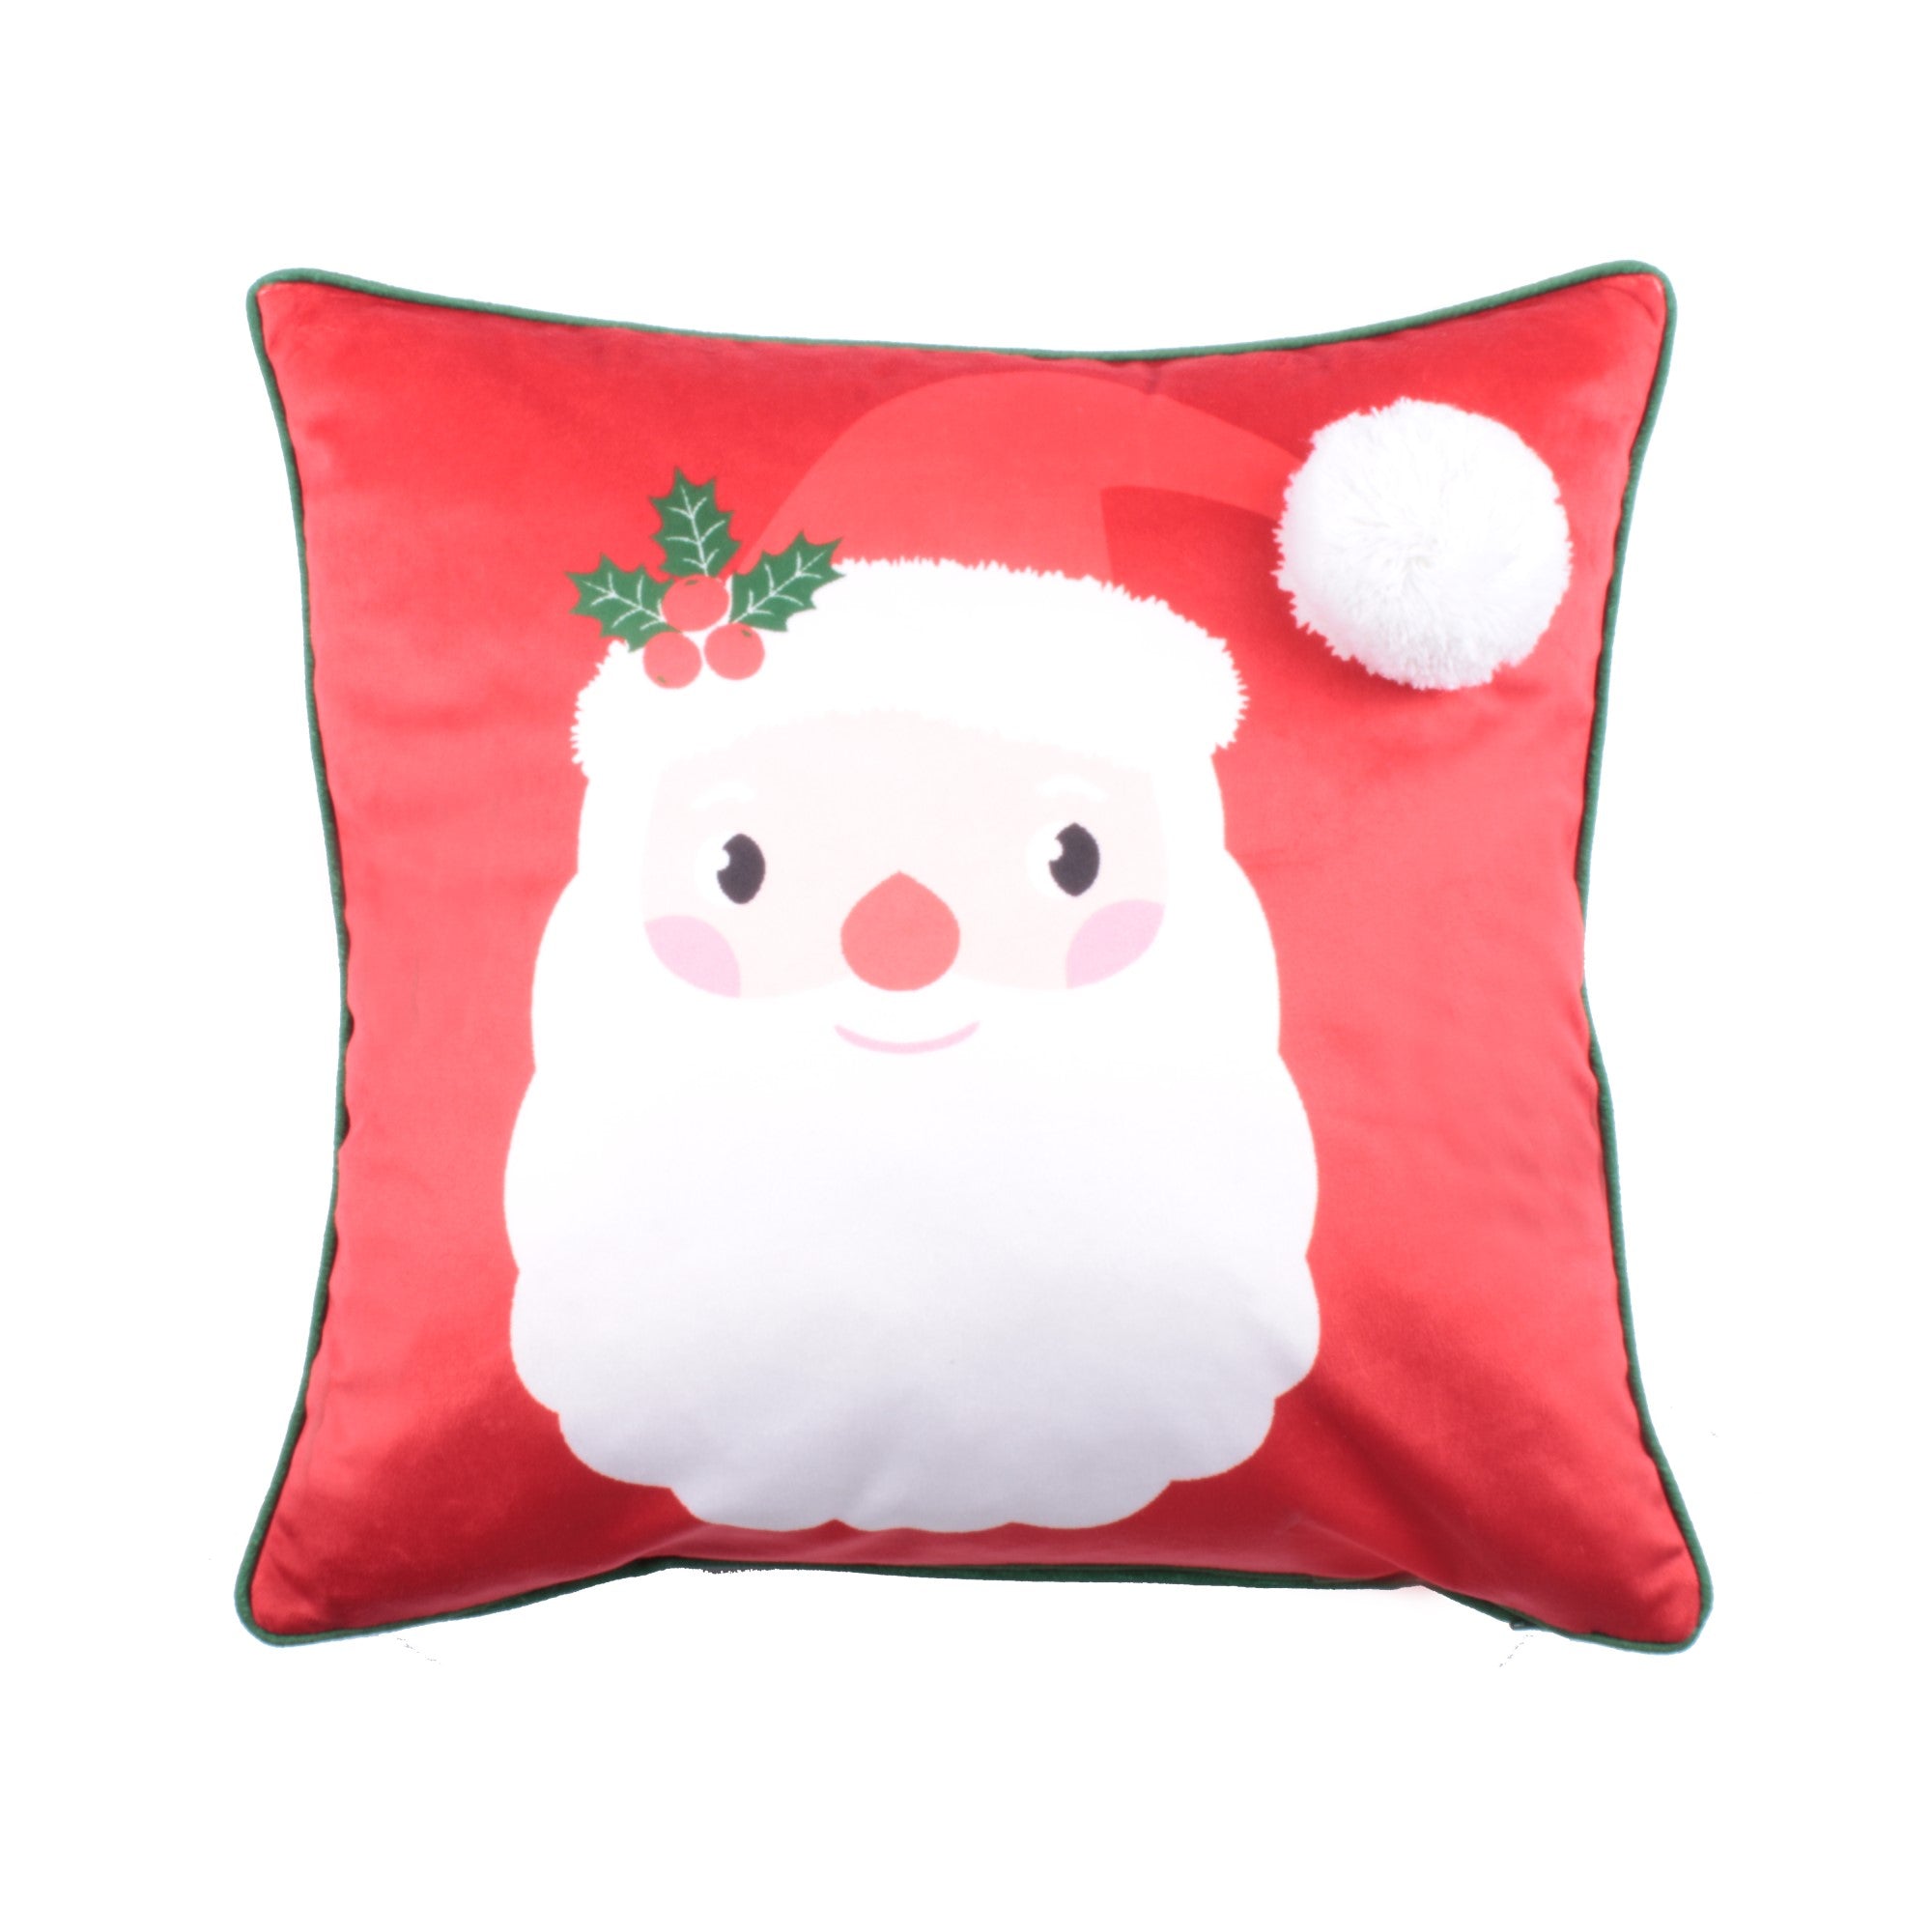 Filled Cushion Jolly Santa by Bedlam in Red